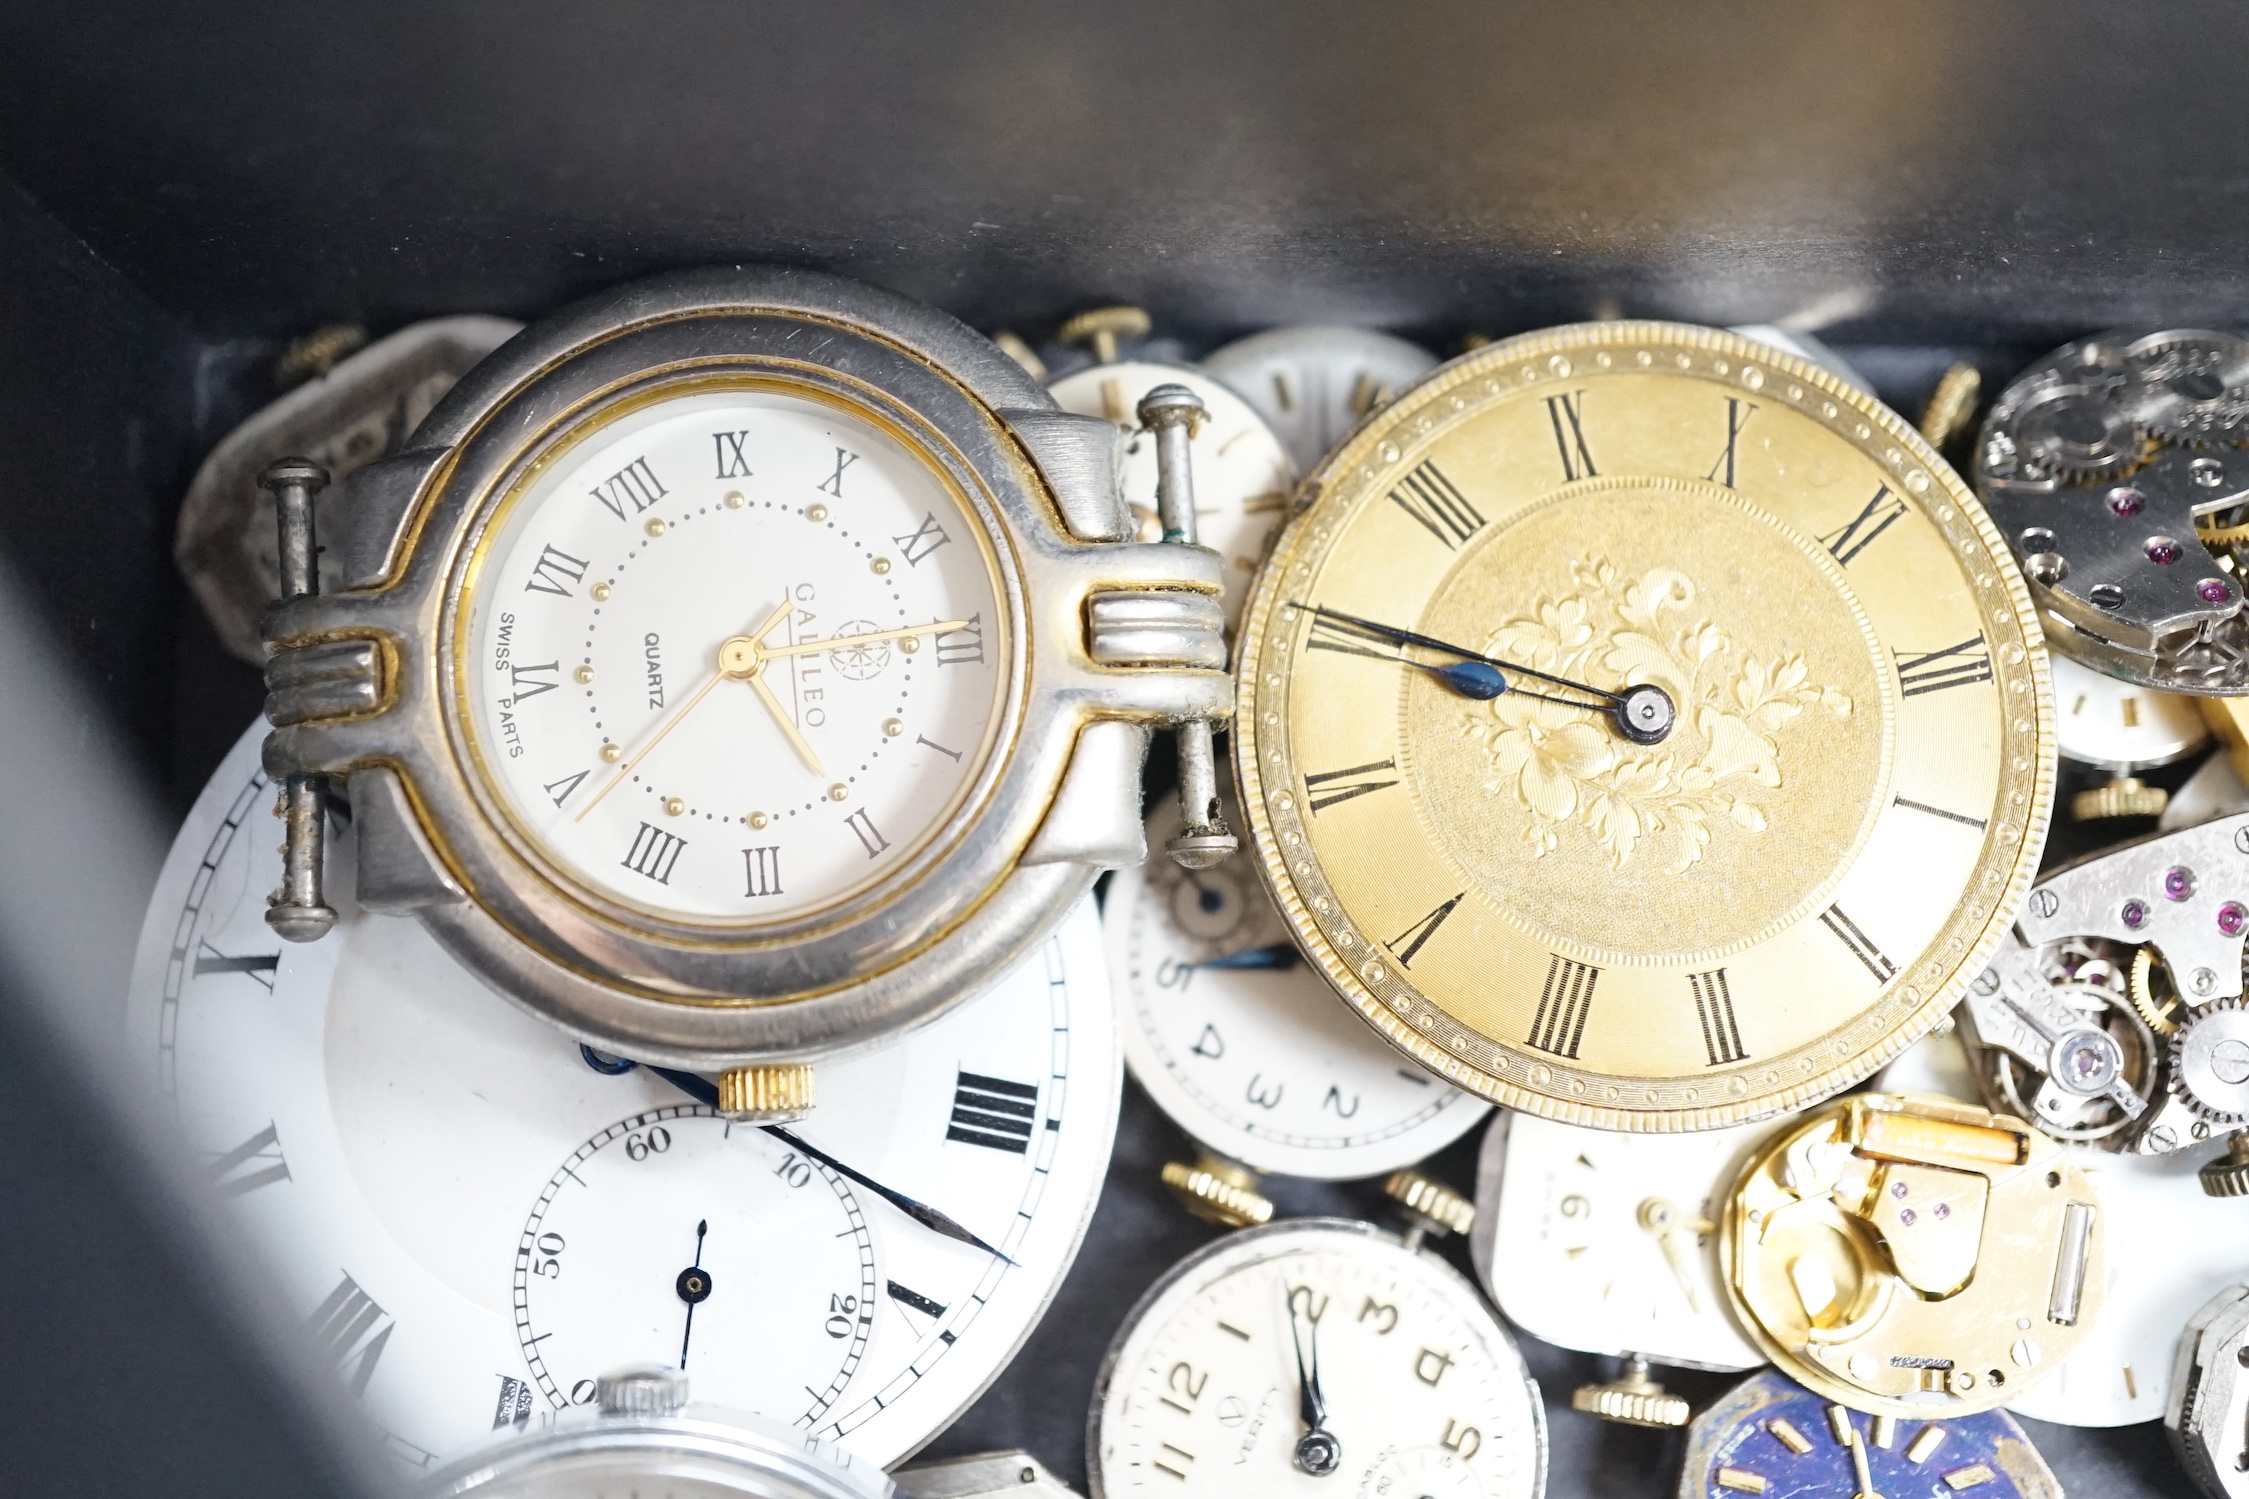 Assorted wrist wand pocket watch movements including Waltham and Rotary and a Swiss 935 standard fob watch.